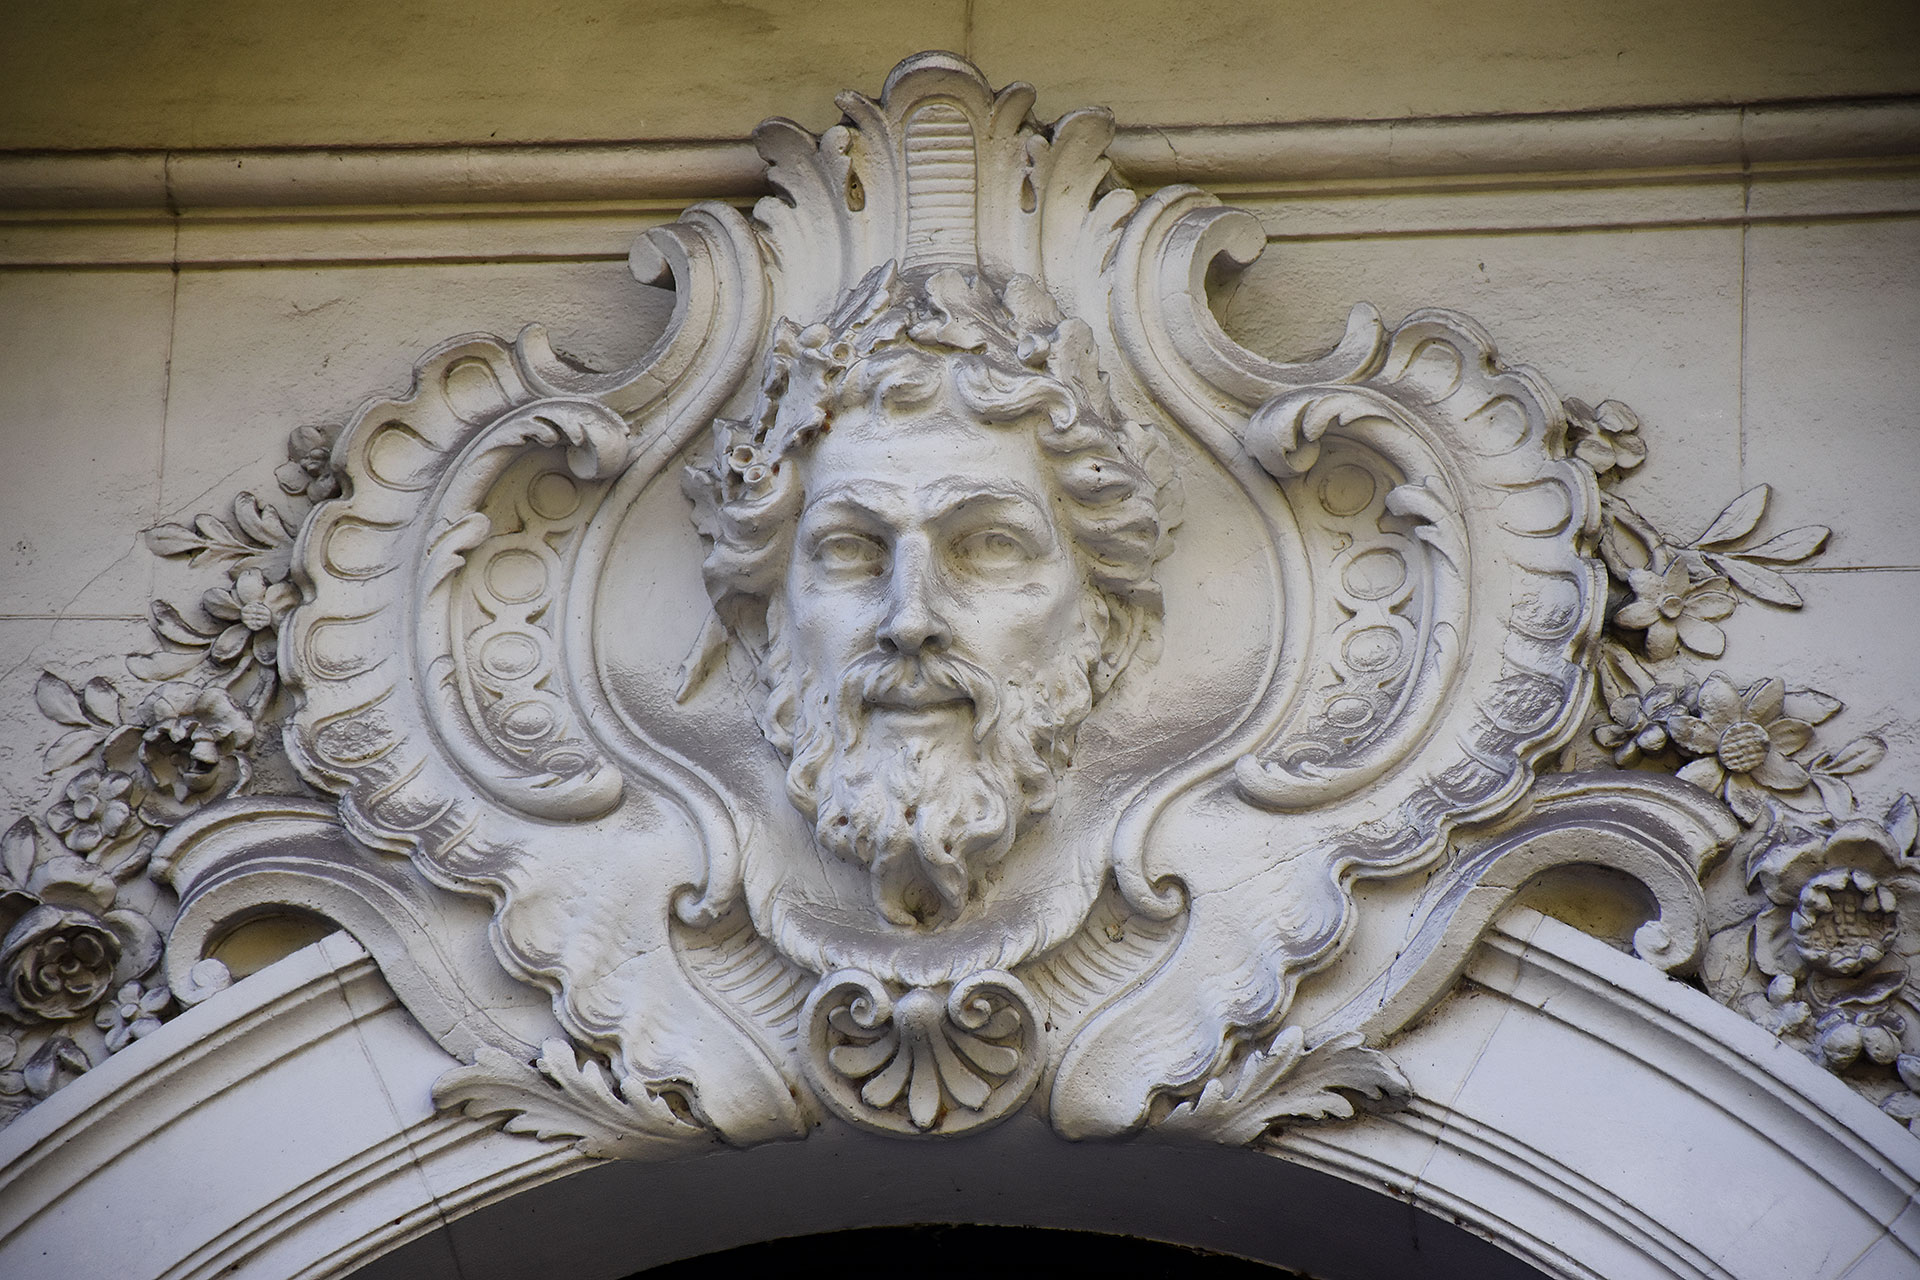 The palace was initially built as a private residence for one of the richest families in Buenos Aires at that time: the Bosch Alvears.  On the front of the building, the relief head of the first owner, Count Federico de Alvear (Nicolás Stulberg) stands out.